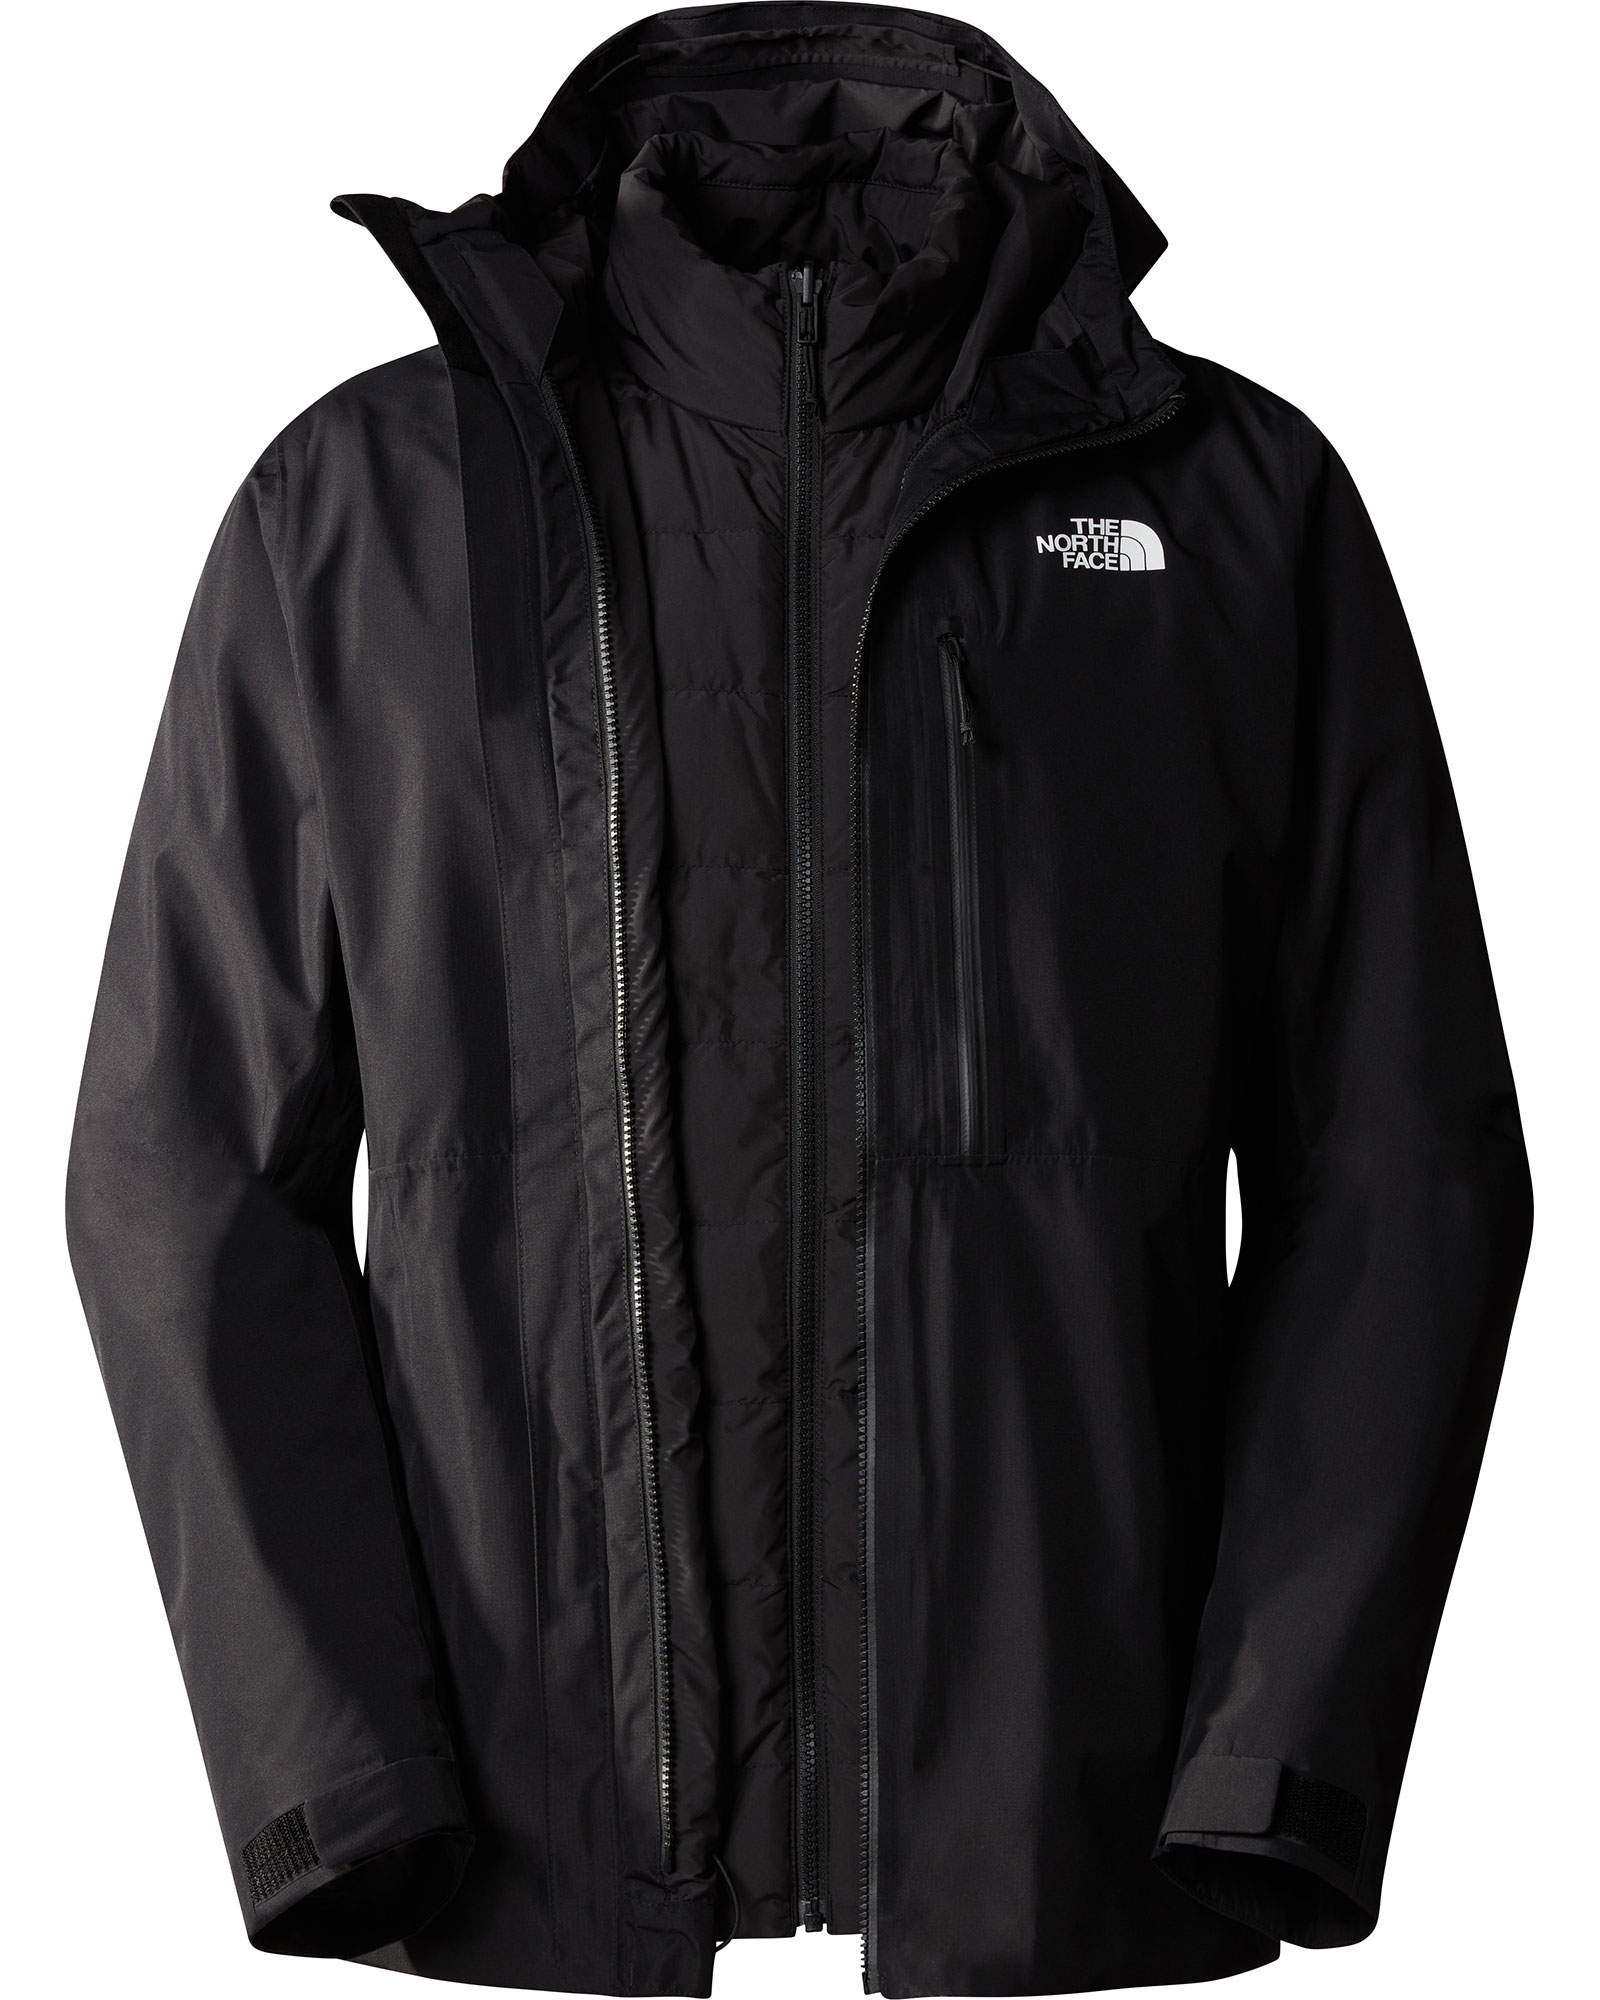 The North Face Men’s North Table Down Triclimate Jacket - TNF Black-TNF Black L